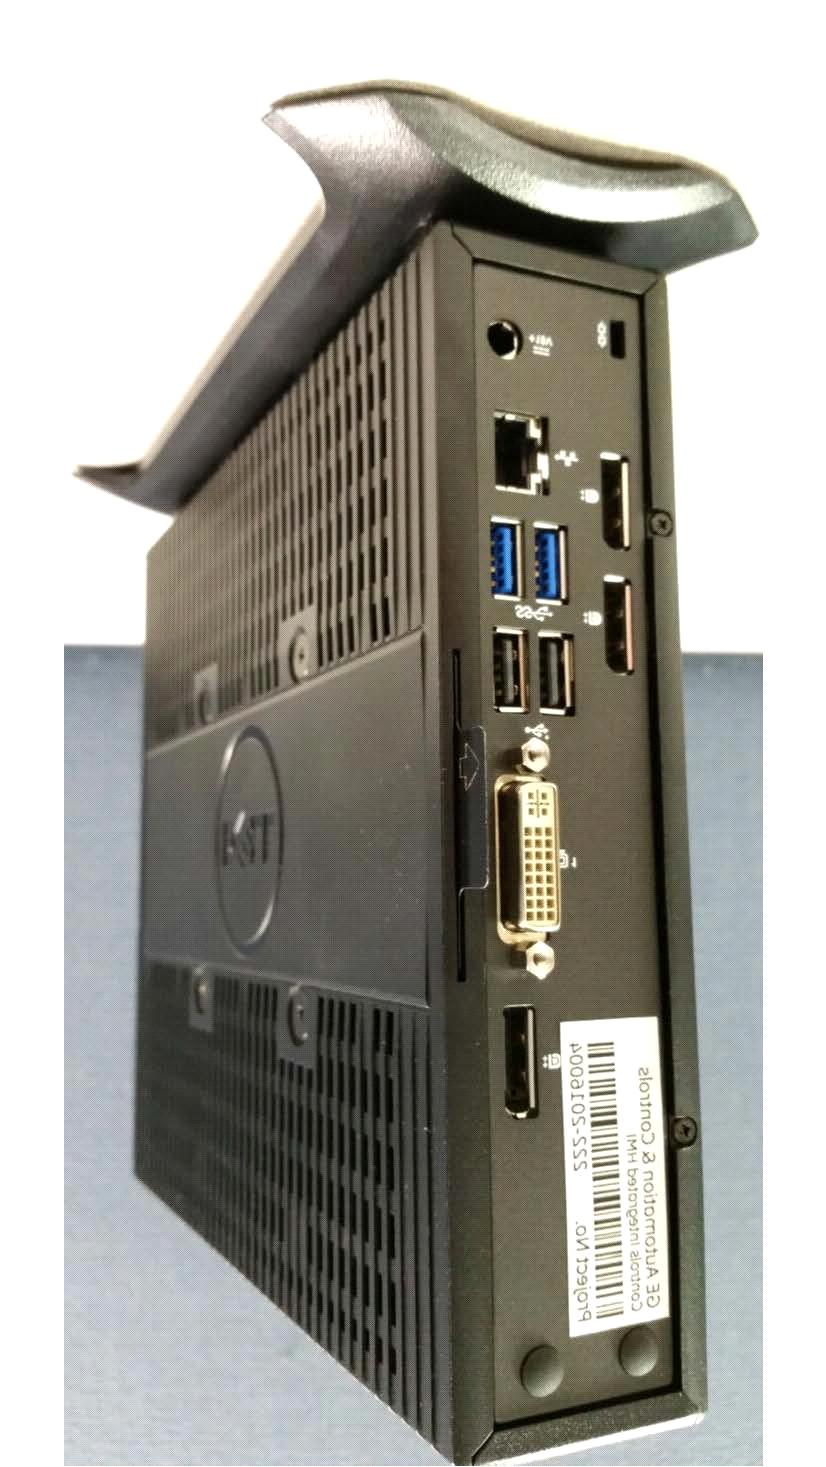 When connecting monitors to the Thin Client terminal, it is recommended that they be connected in physical port order.